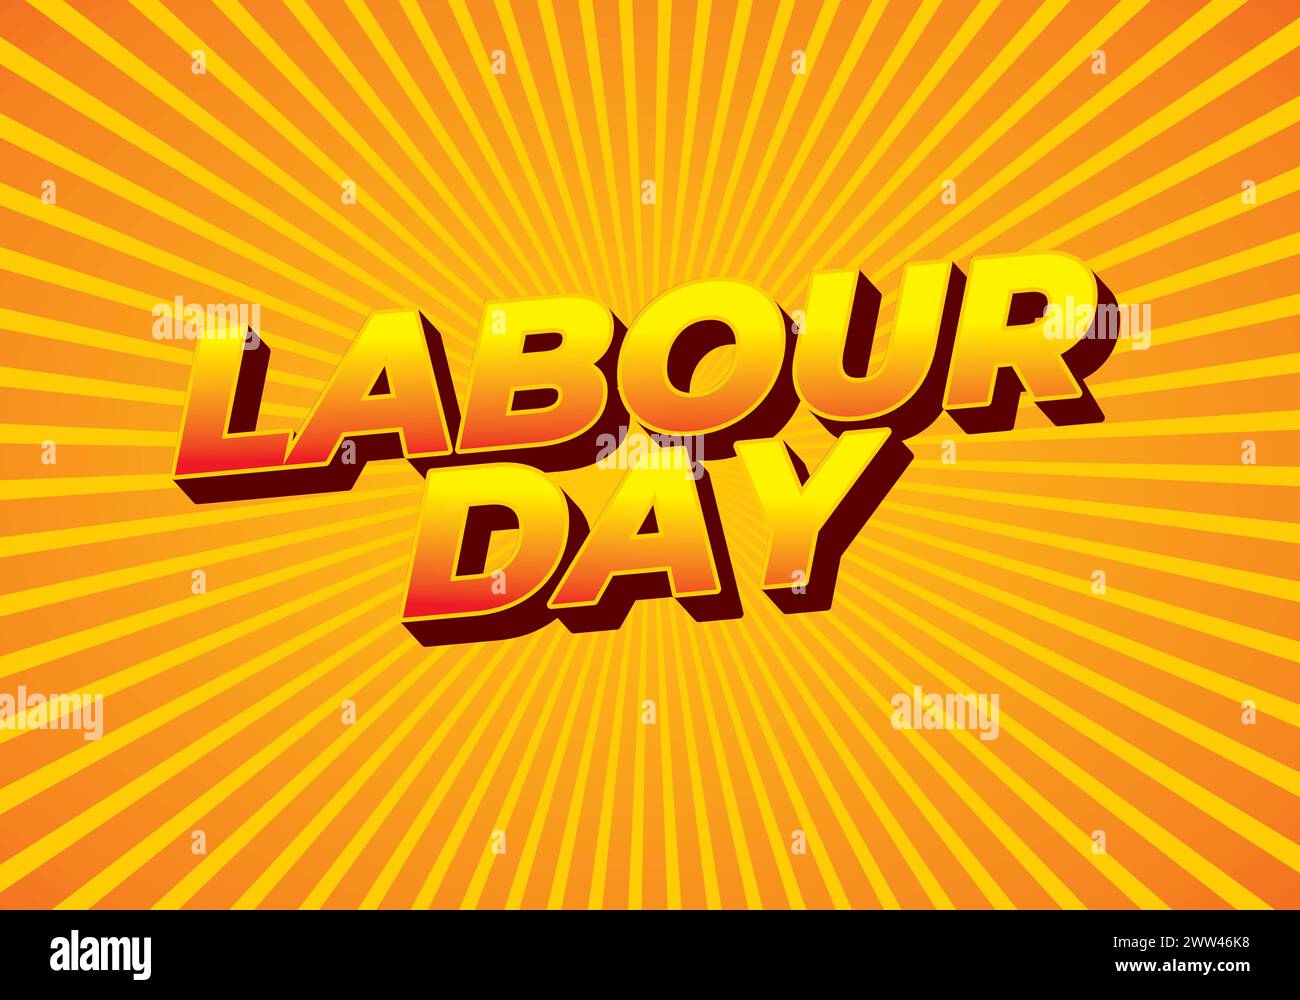 Labour day. Text effect design in yellow orange color with eye catching effect Stock Vector